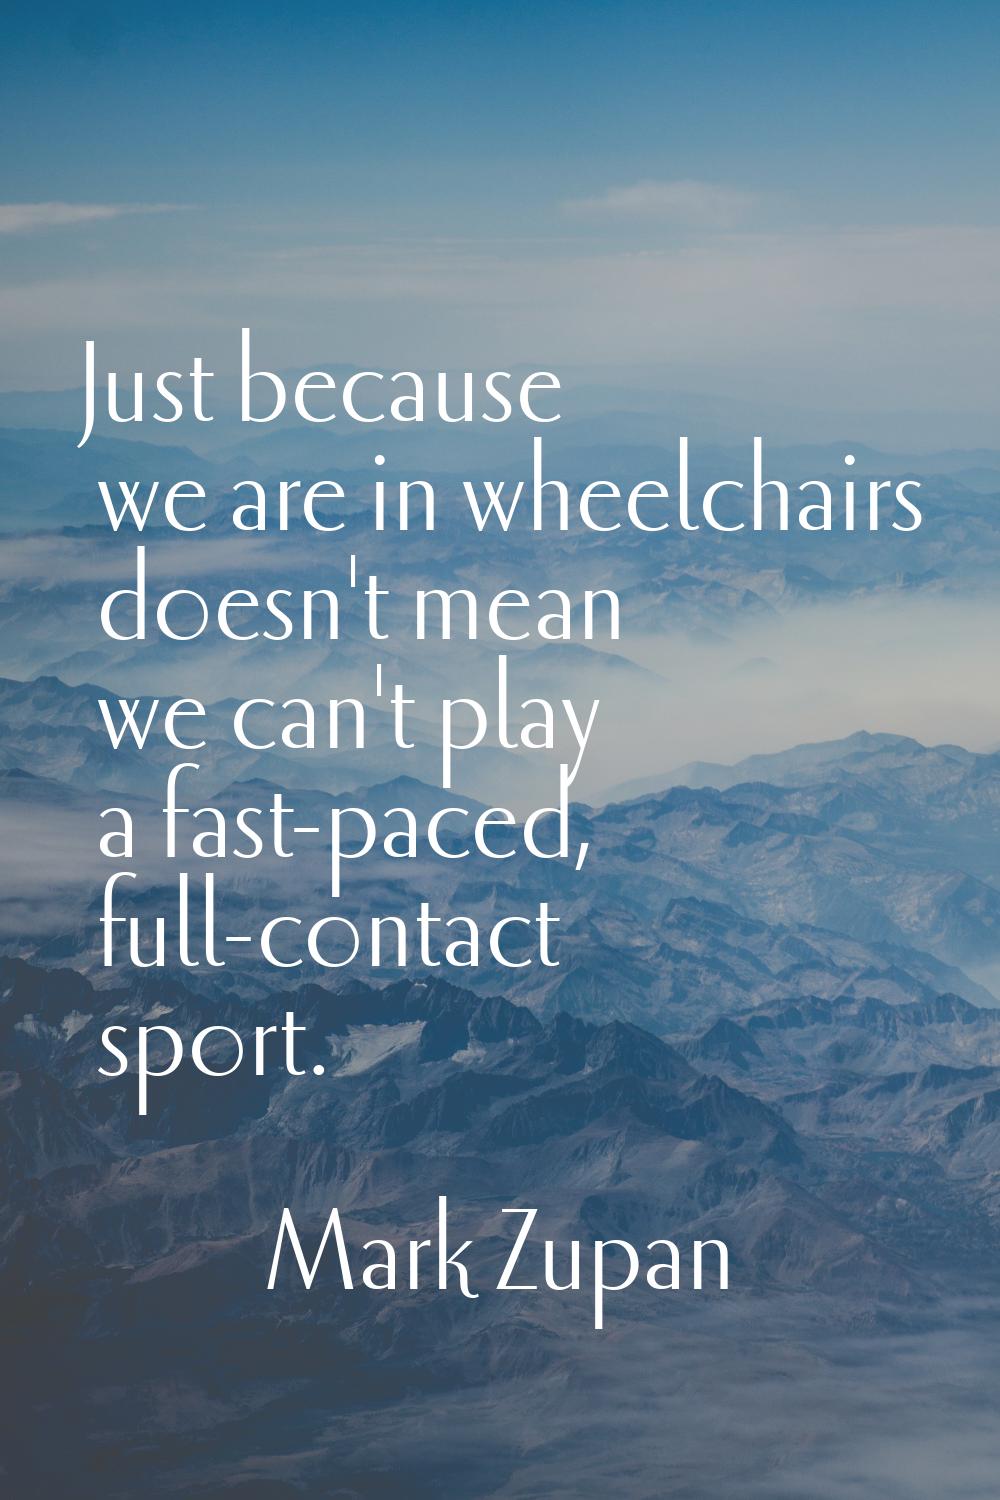 Just because we are in wheelchairs doesn't mean we can't play a fast-paced, full-contact sport.